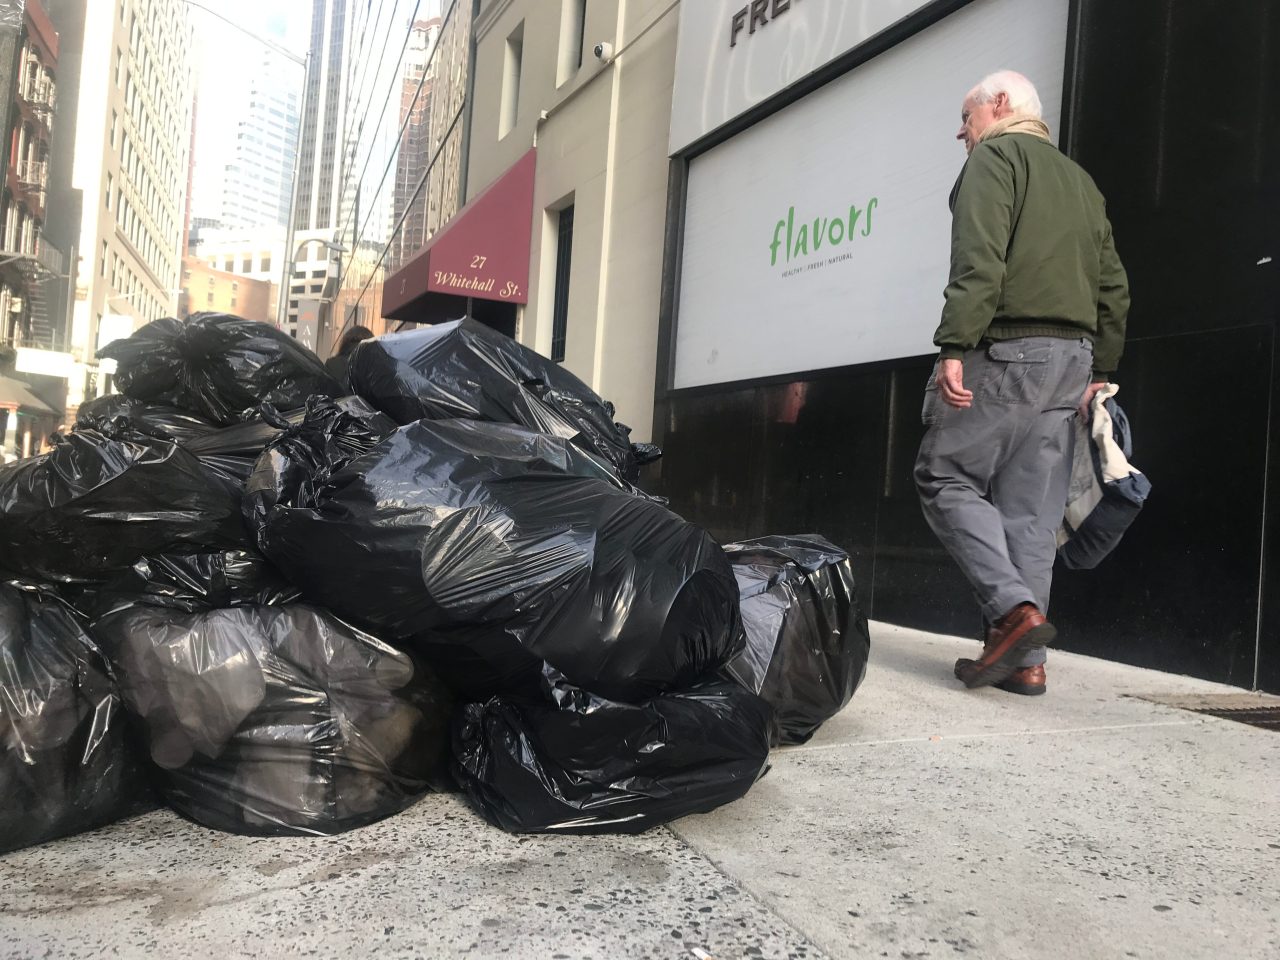 A scene that can be seen every day: a New Yorker trying to avoid a huge pile of trash on the sidewalk. File photo: Gersh Kuntzman